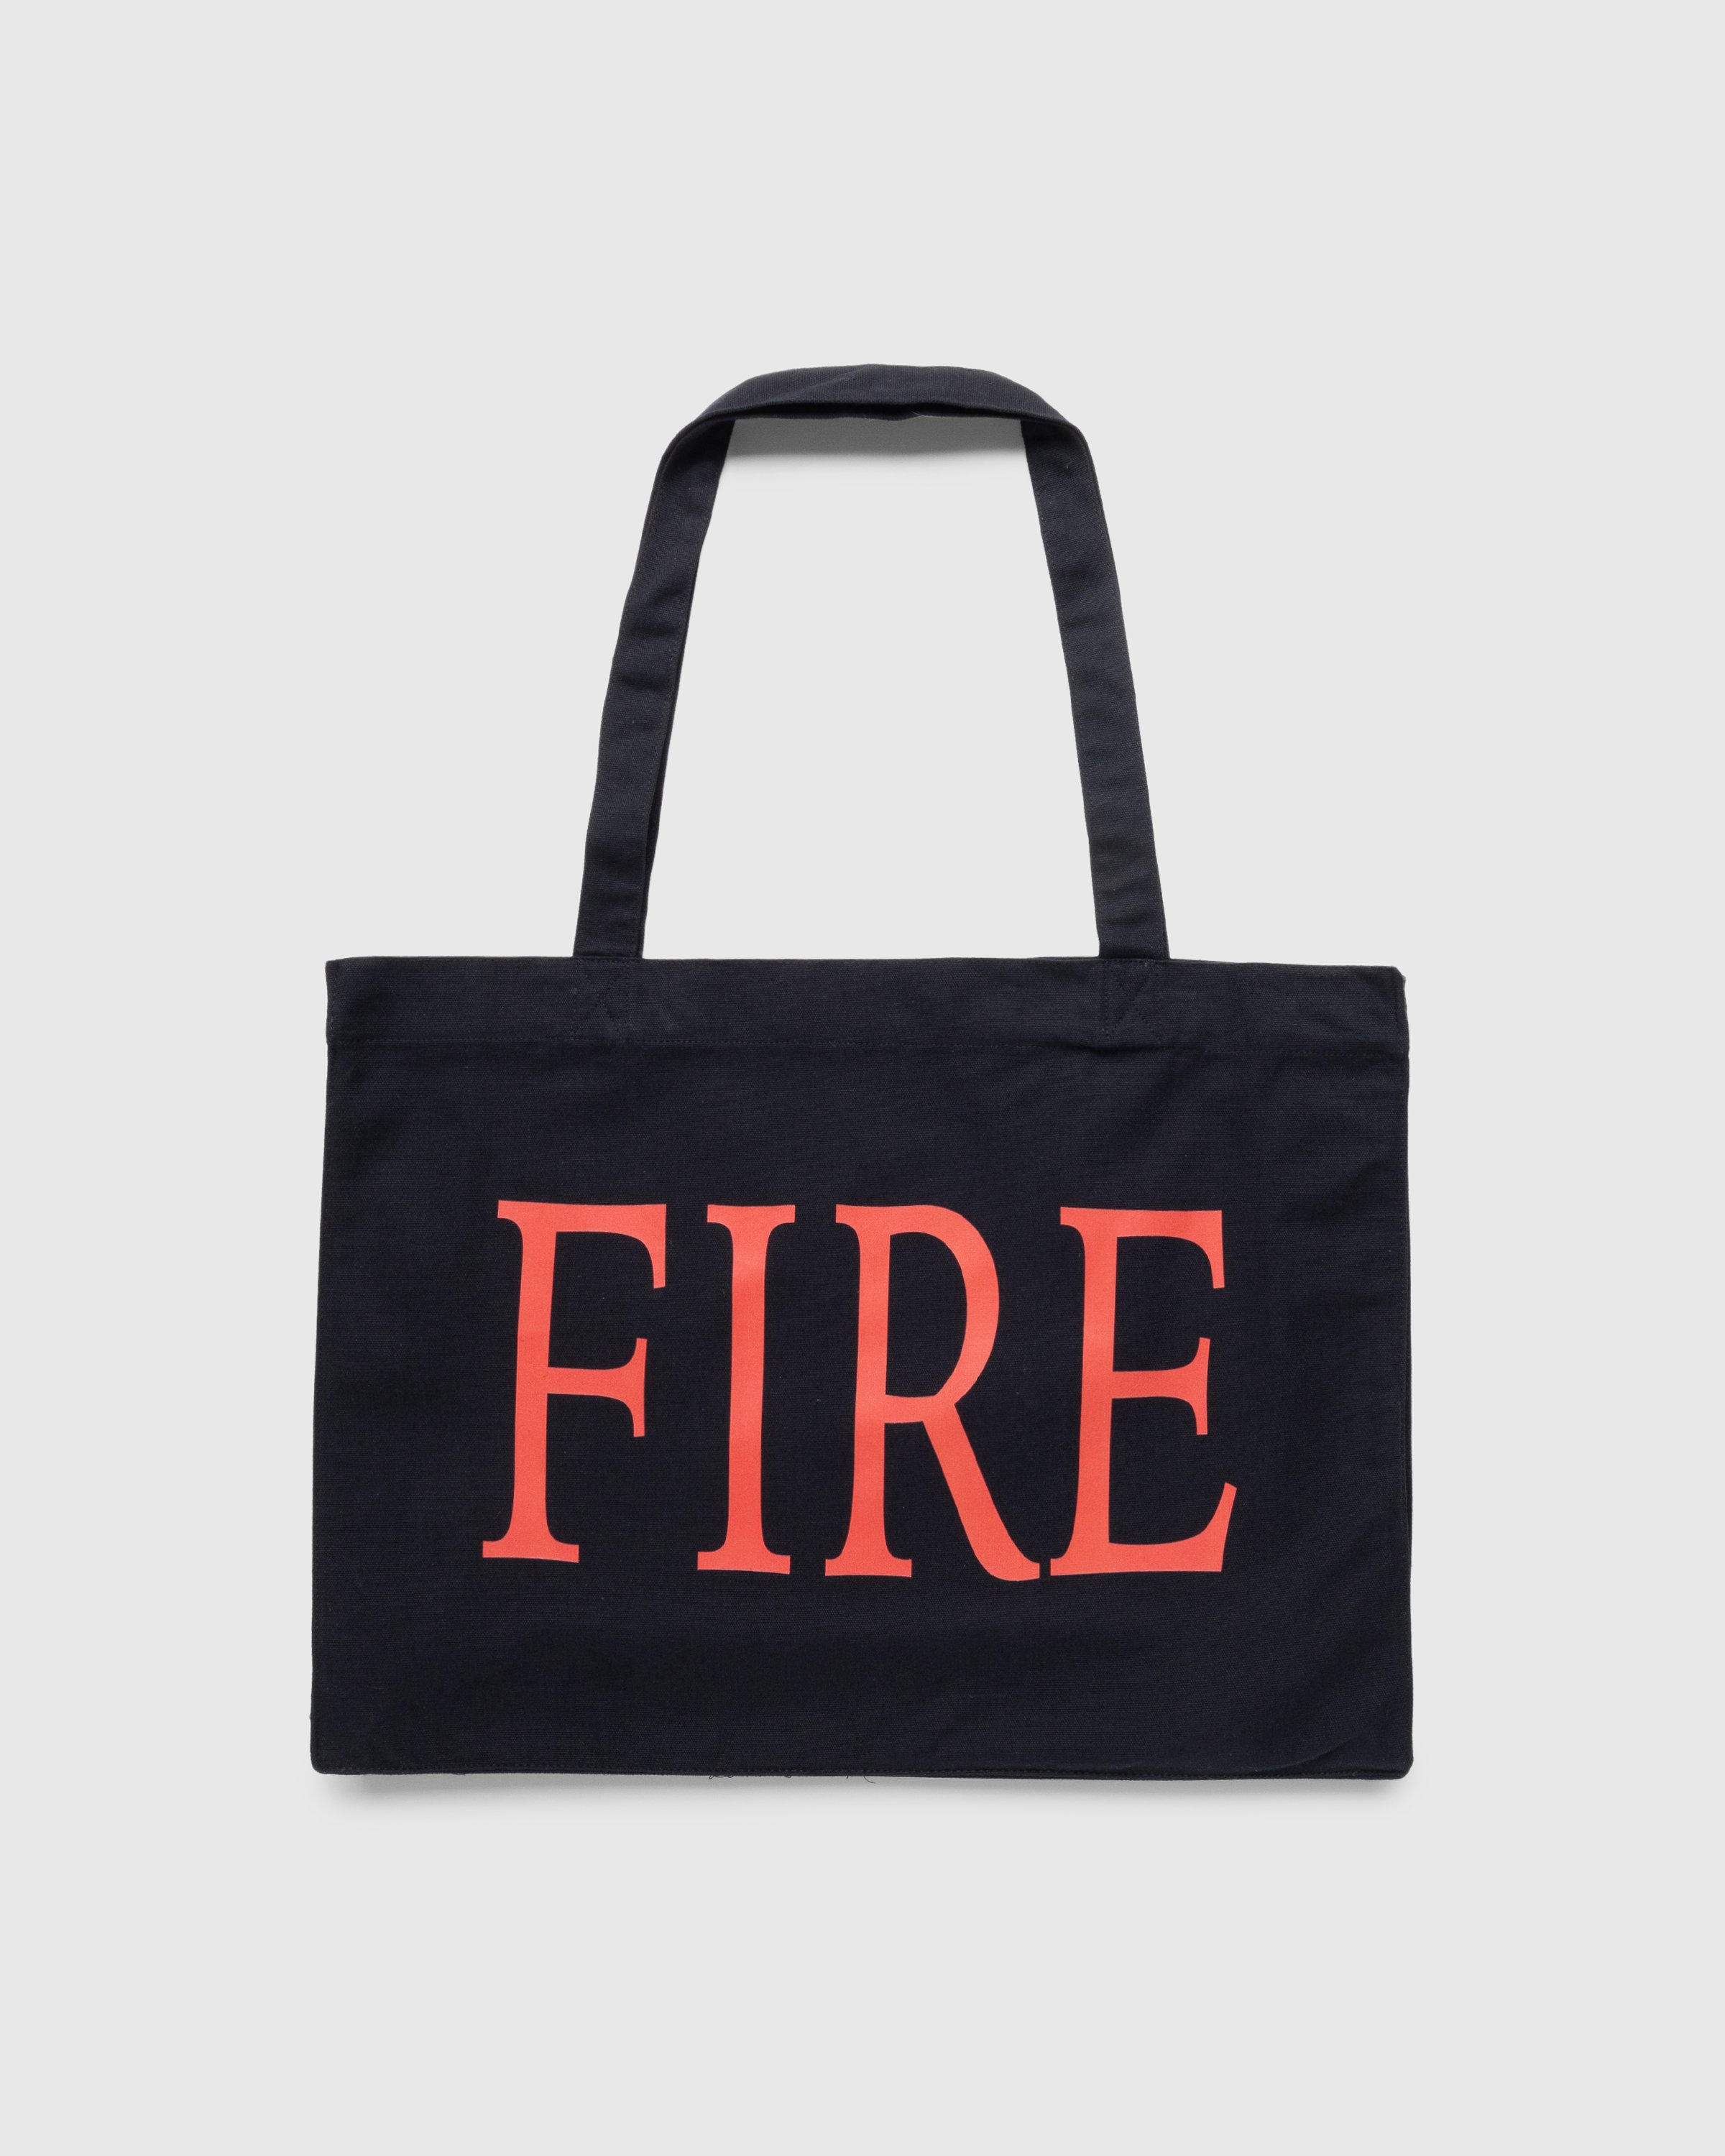 Chiltern Firehouse x Highsnobiety - Tote Bag - Accessories - Black - Image 1